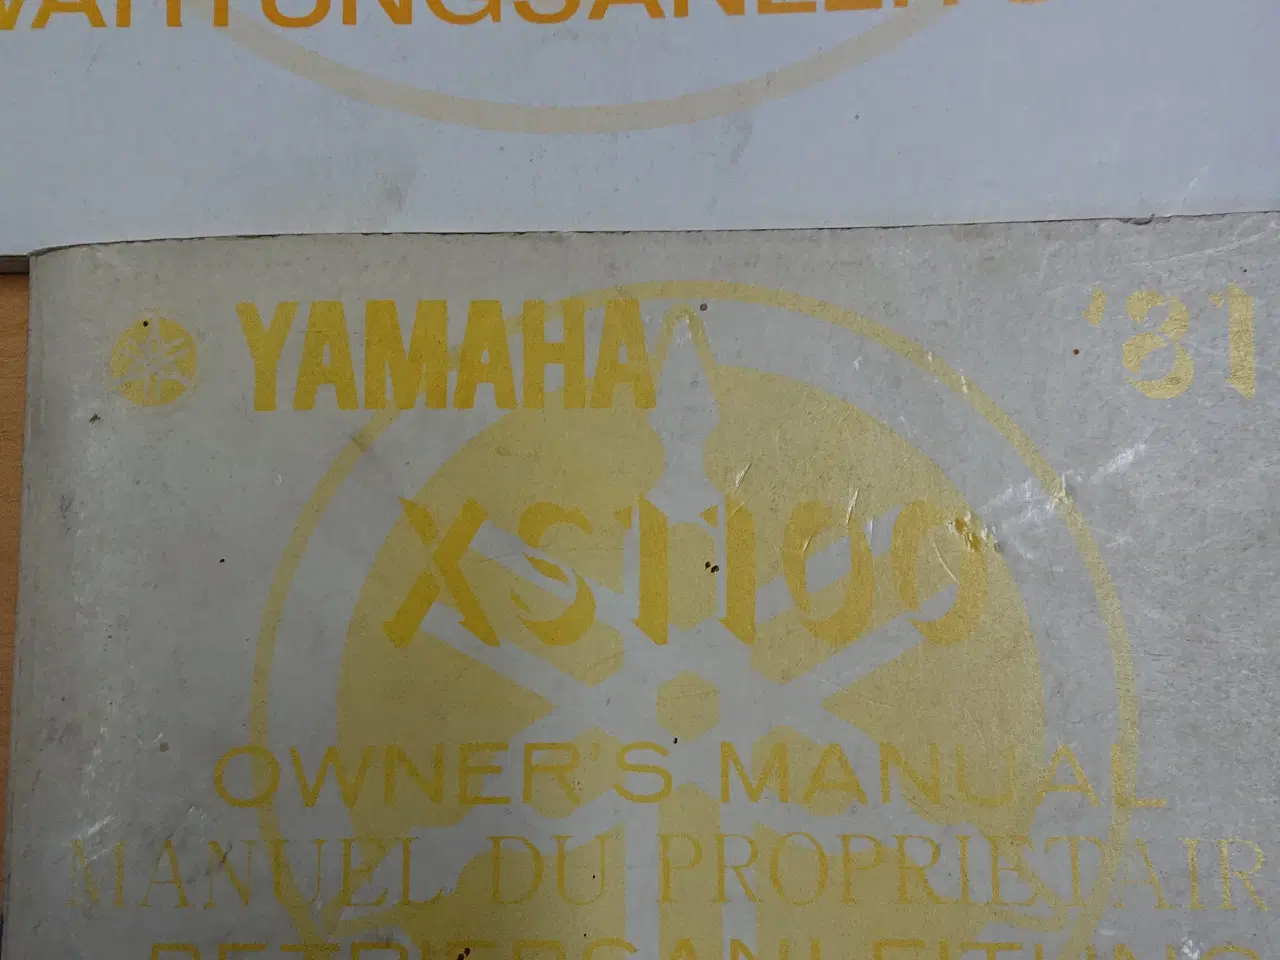 Billede 4 - services manual Yamaha XS100S+owners book